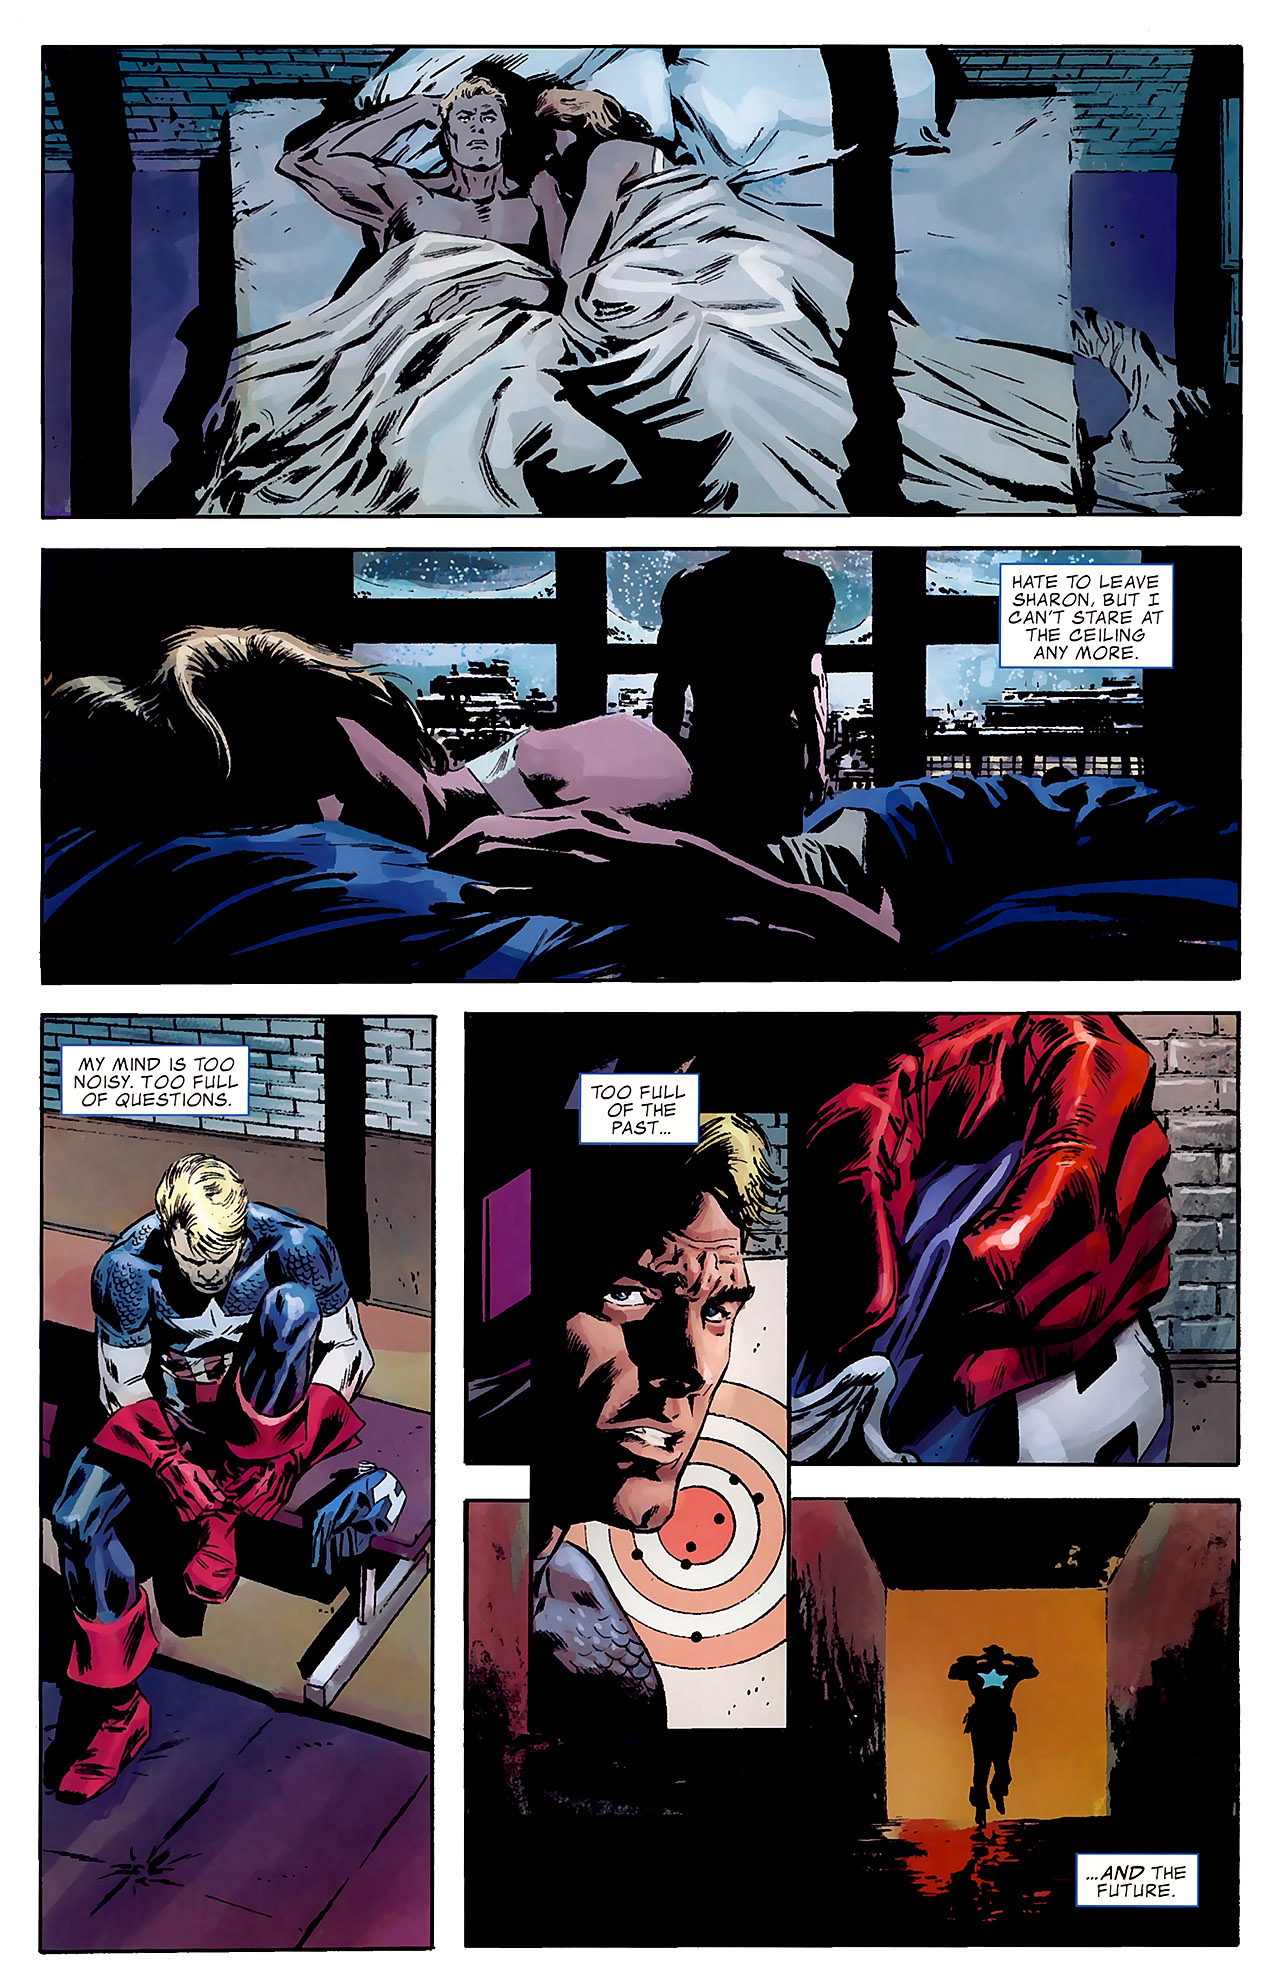 Captain America Reborn: Who Will Wield the Shield? Full Page 13